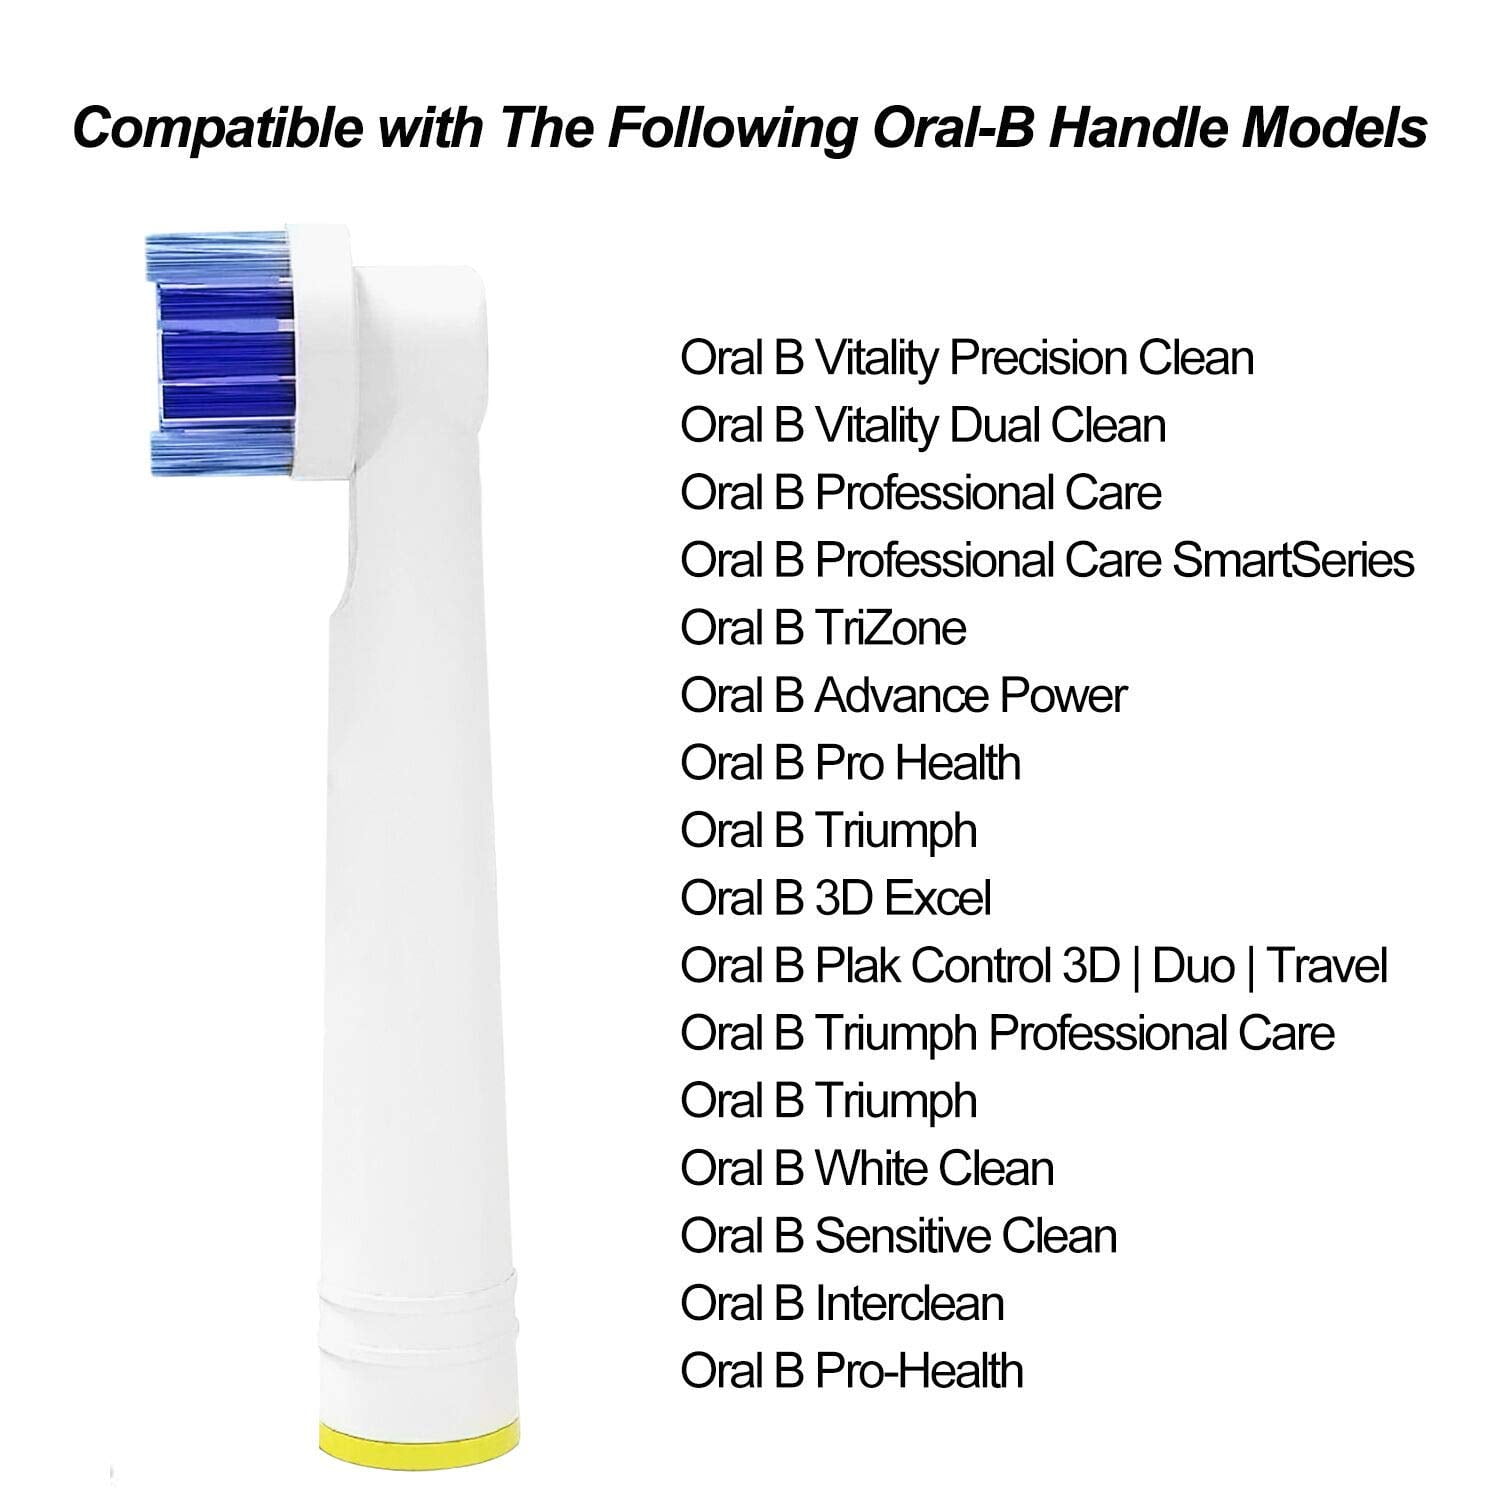 Toothbrush Heads Compatible With B Braun, 4 Pack Professional Electric Toothbrush Heads Brush Heads Refill Oral-B 7000/ Pro 1000/9600/ 500/3000/8000 | Walmart Canada